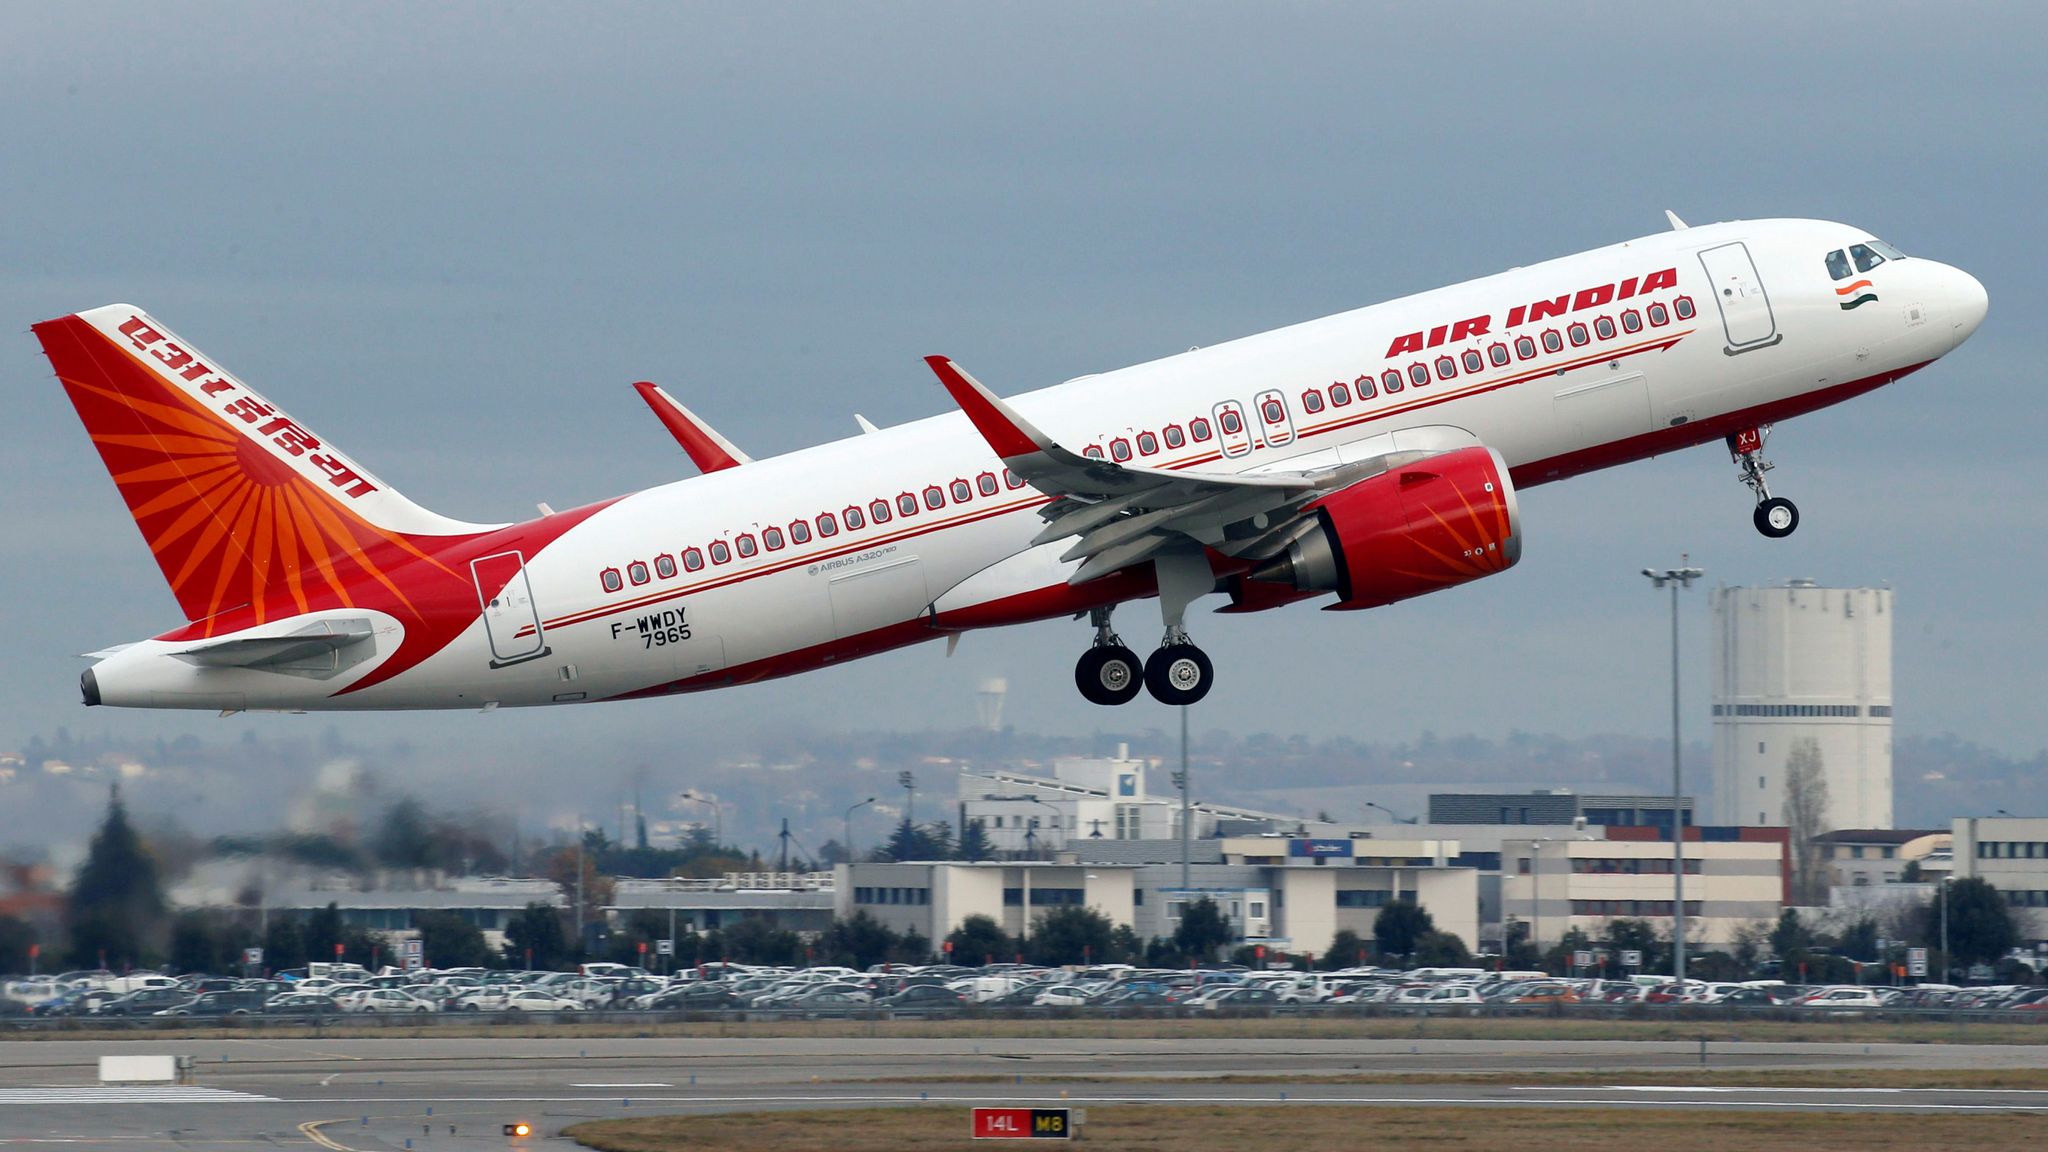 Air India: At least 4.5 million people's data exposed following IT system hack